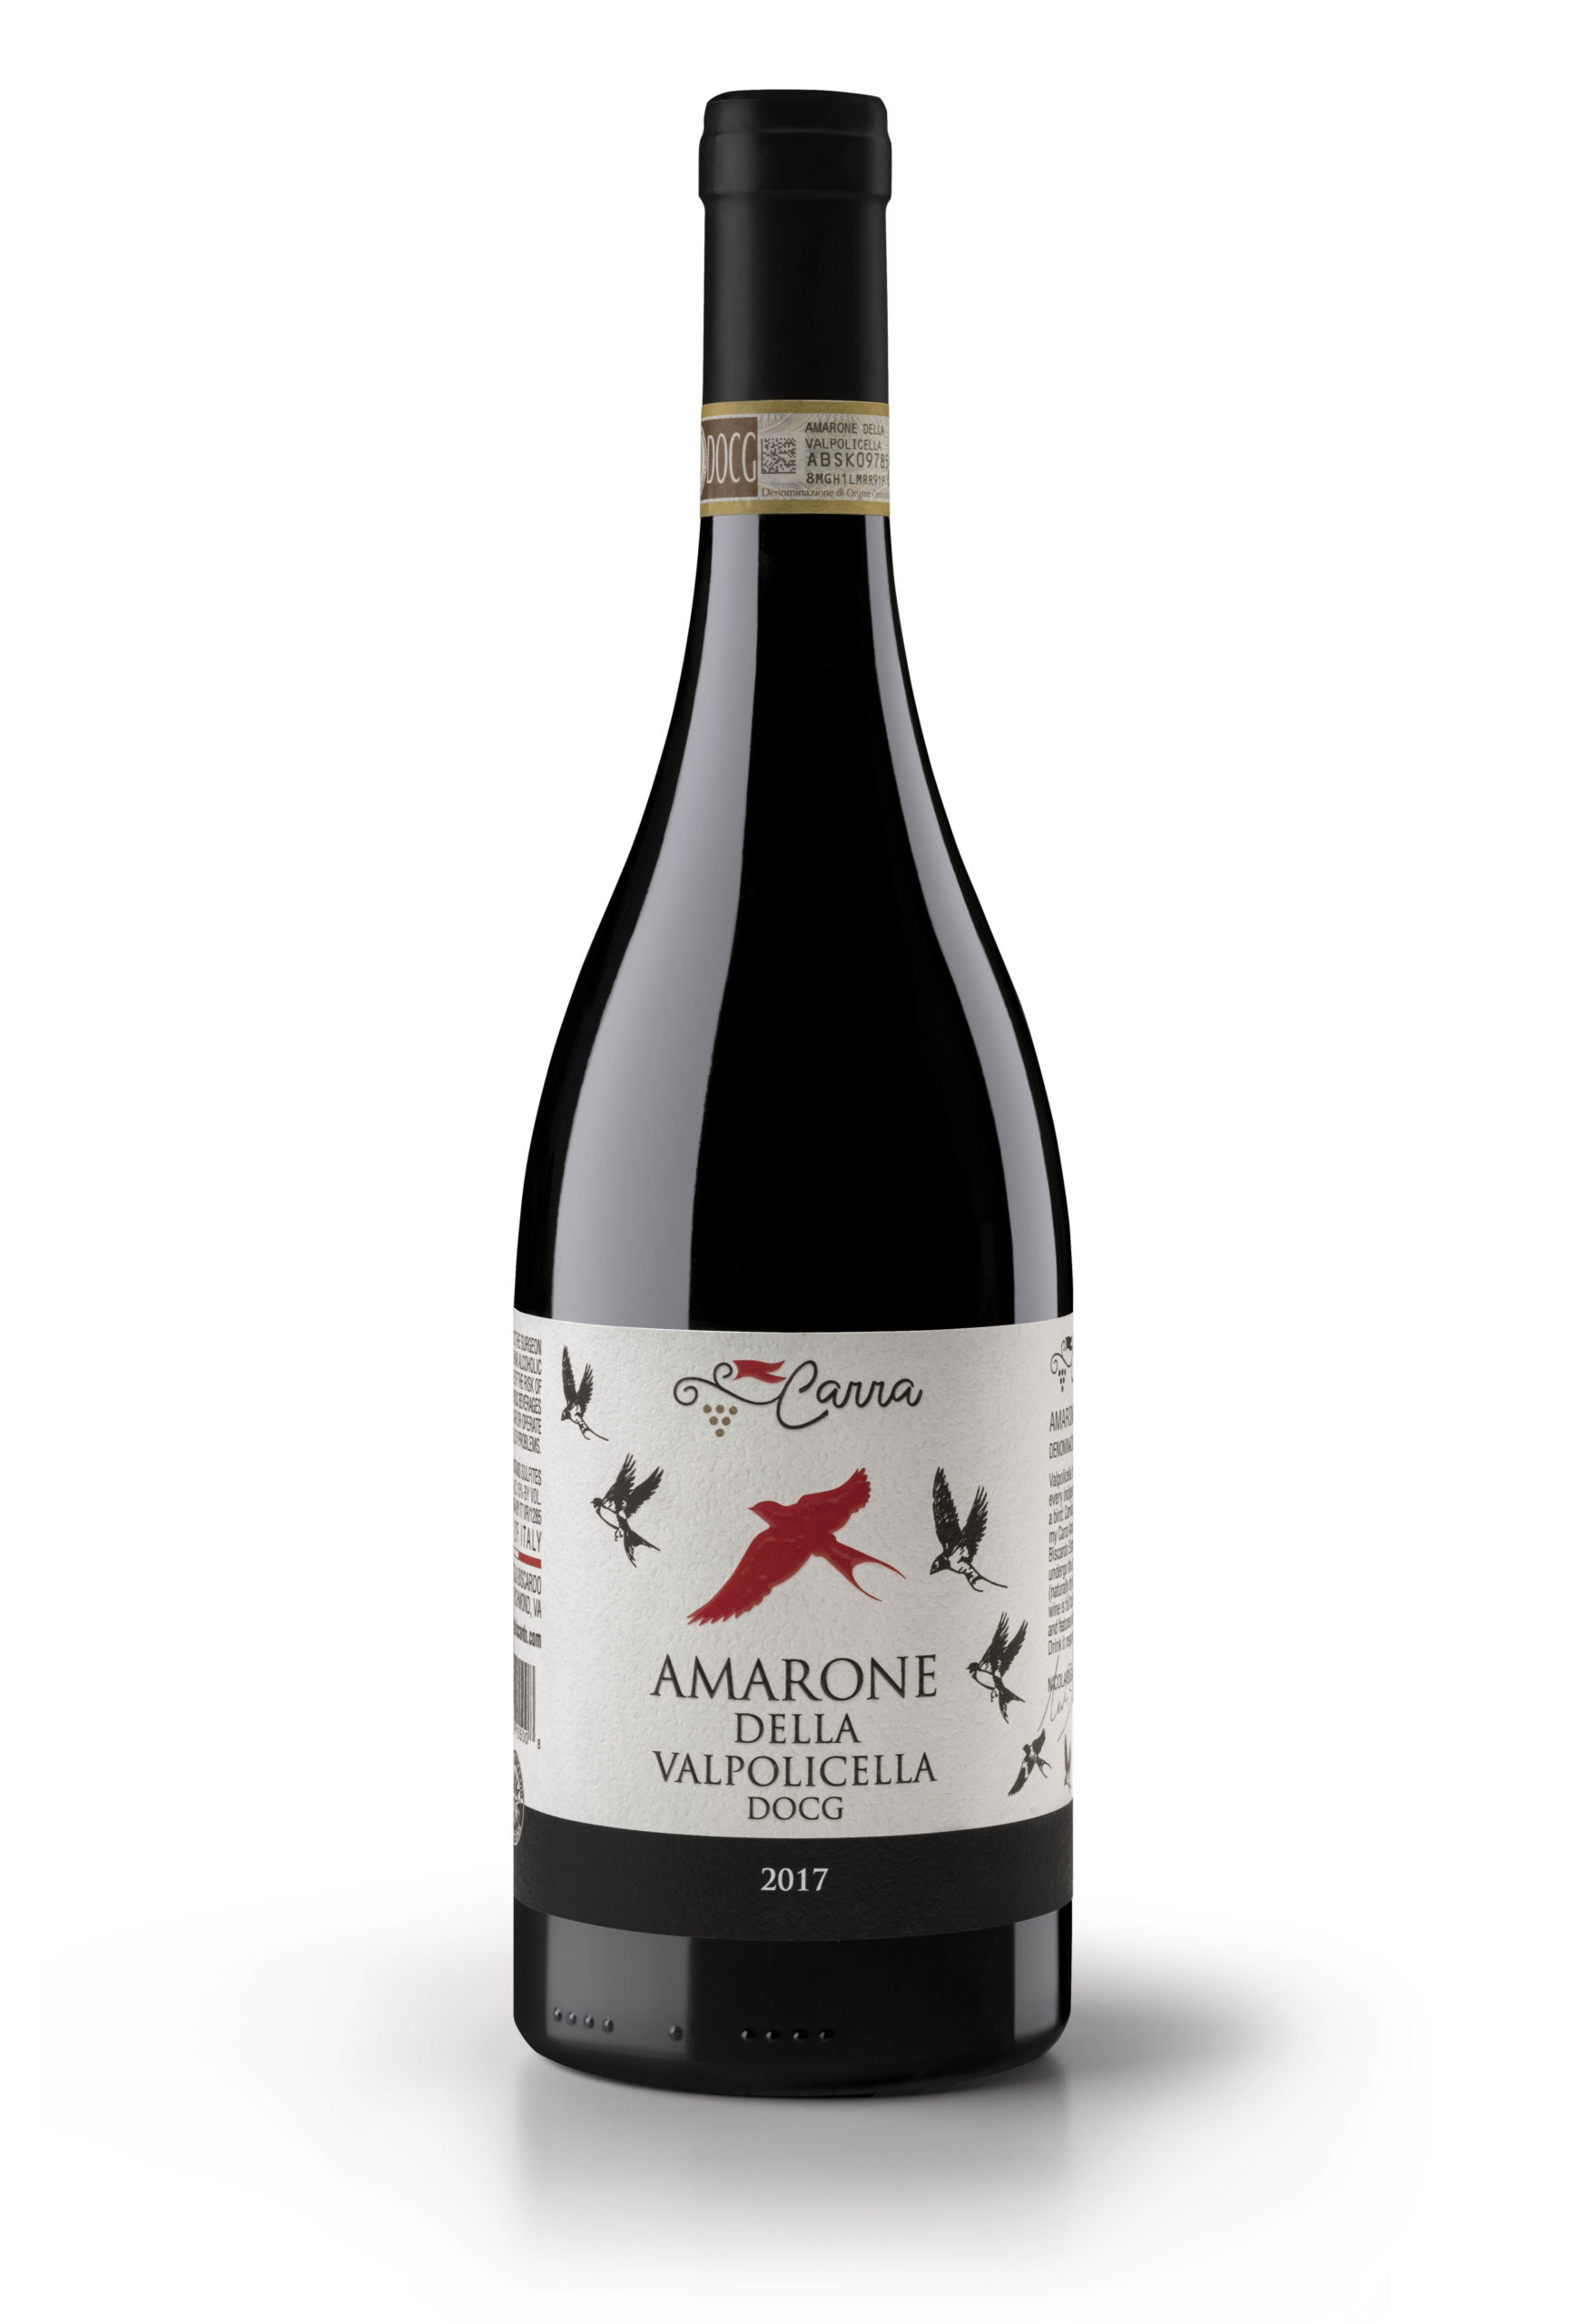 Product Image for Carra Amarone